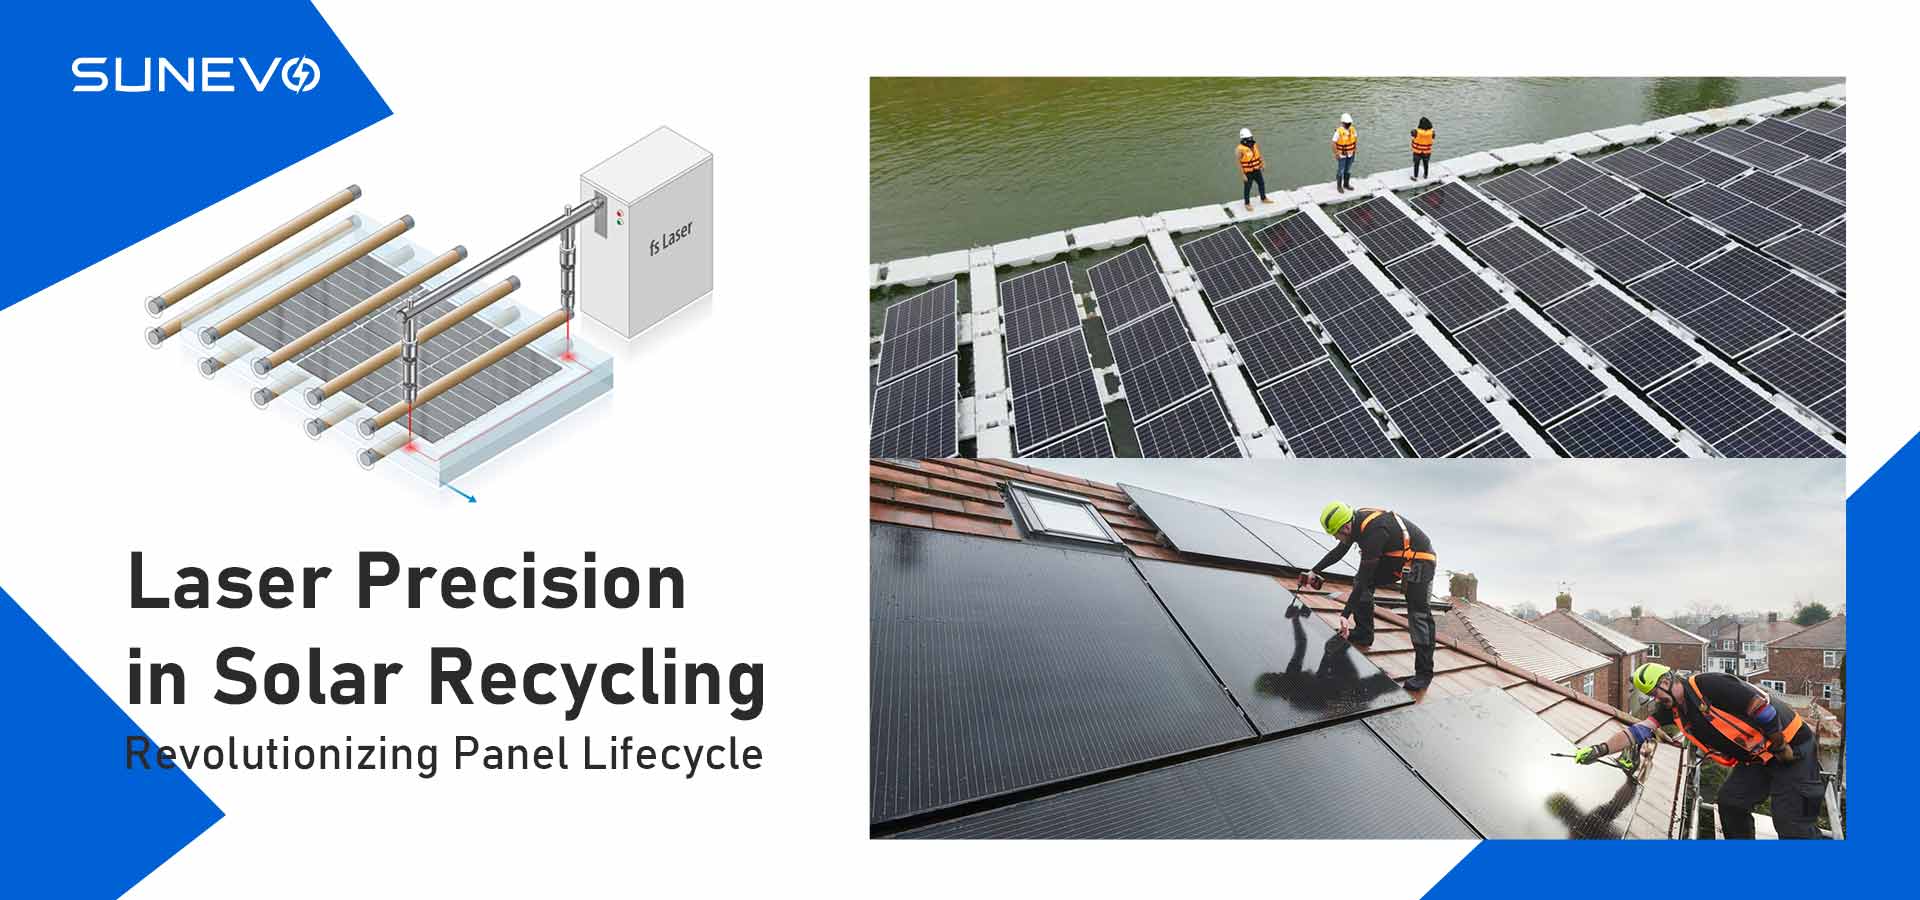 Laser Precision in Solar Recycling: Revolutionizing Panel Lifecycle